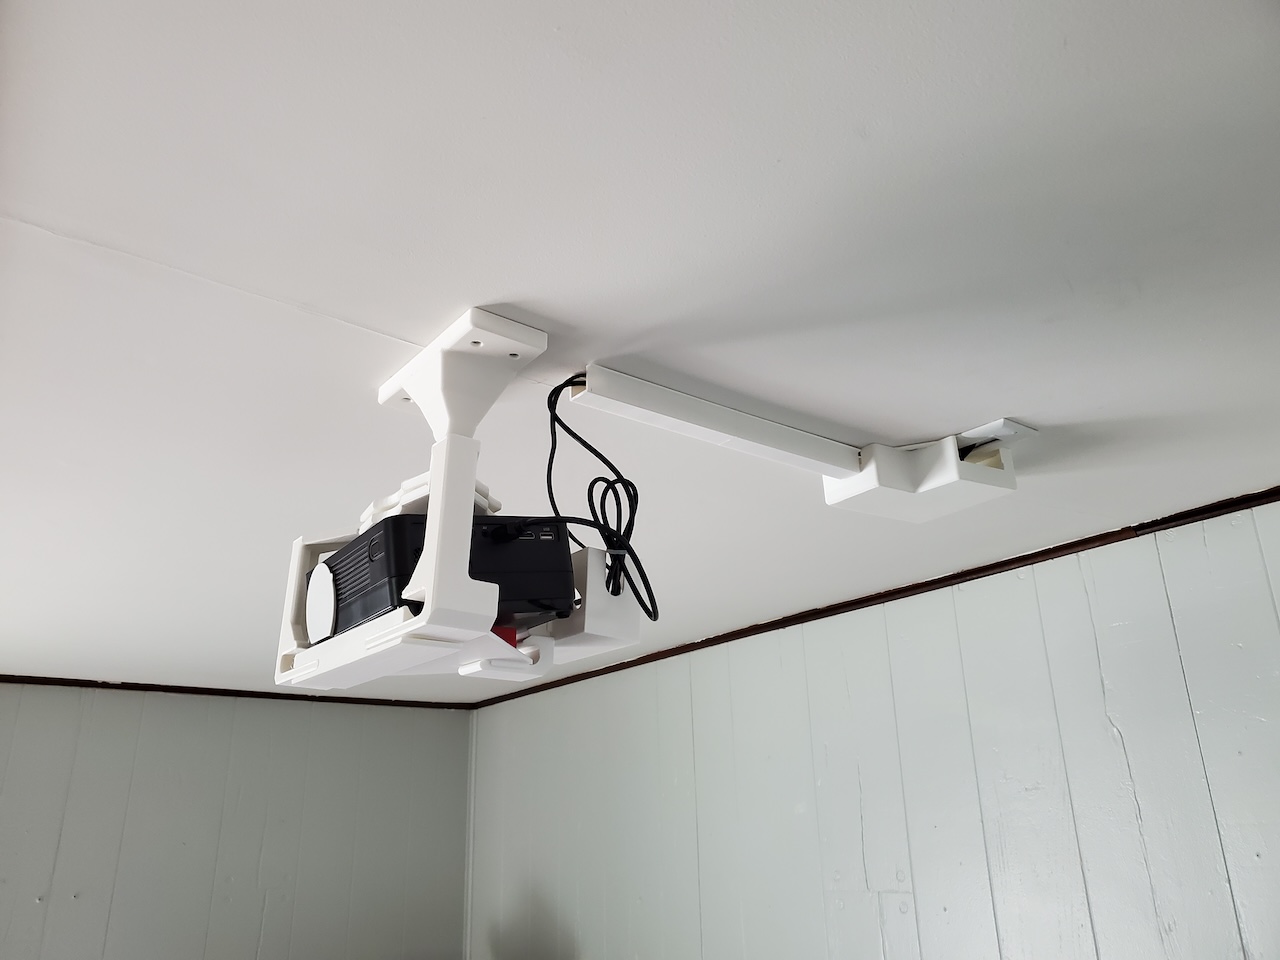 How To Mount A Projector On The Ceiling